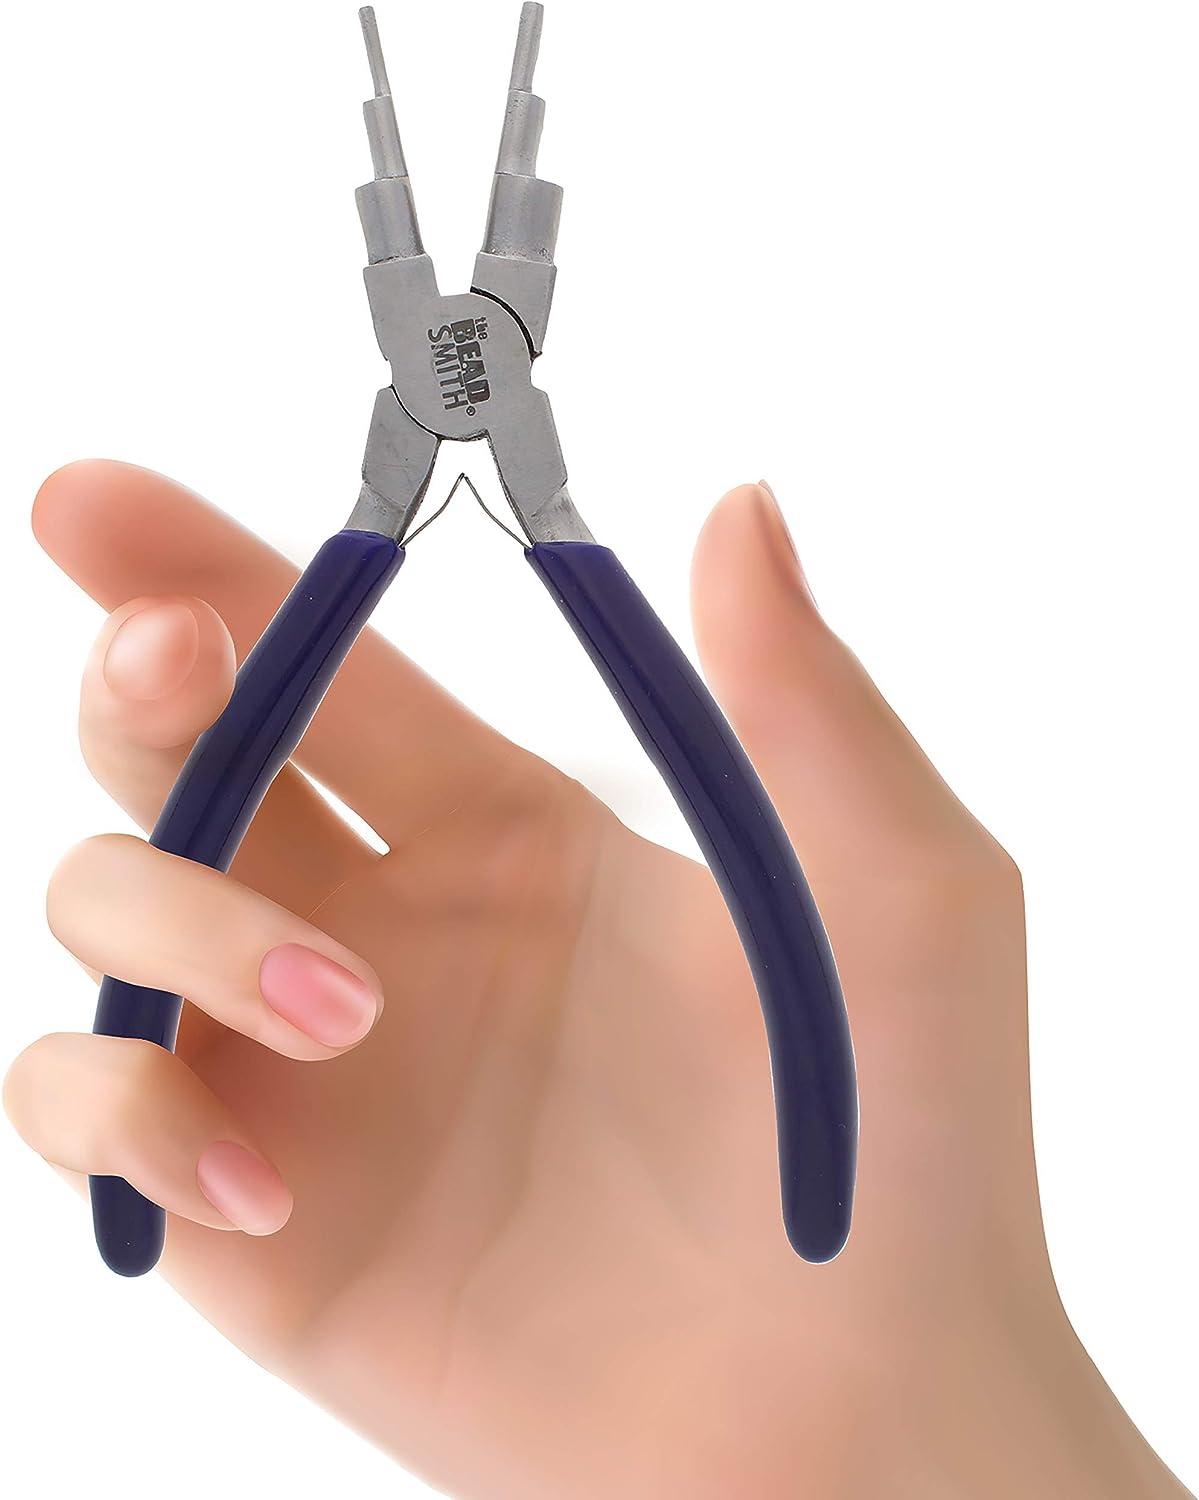 Chain Nose Pliers for Bending, Shaping and Looping Wire, 5.5 Inch